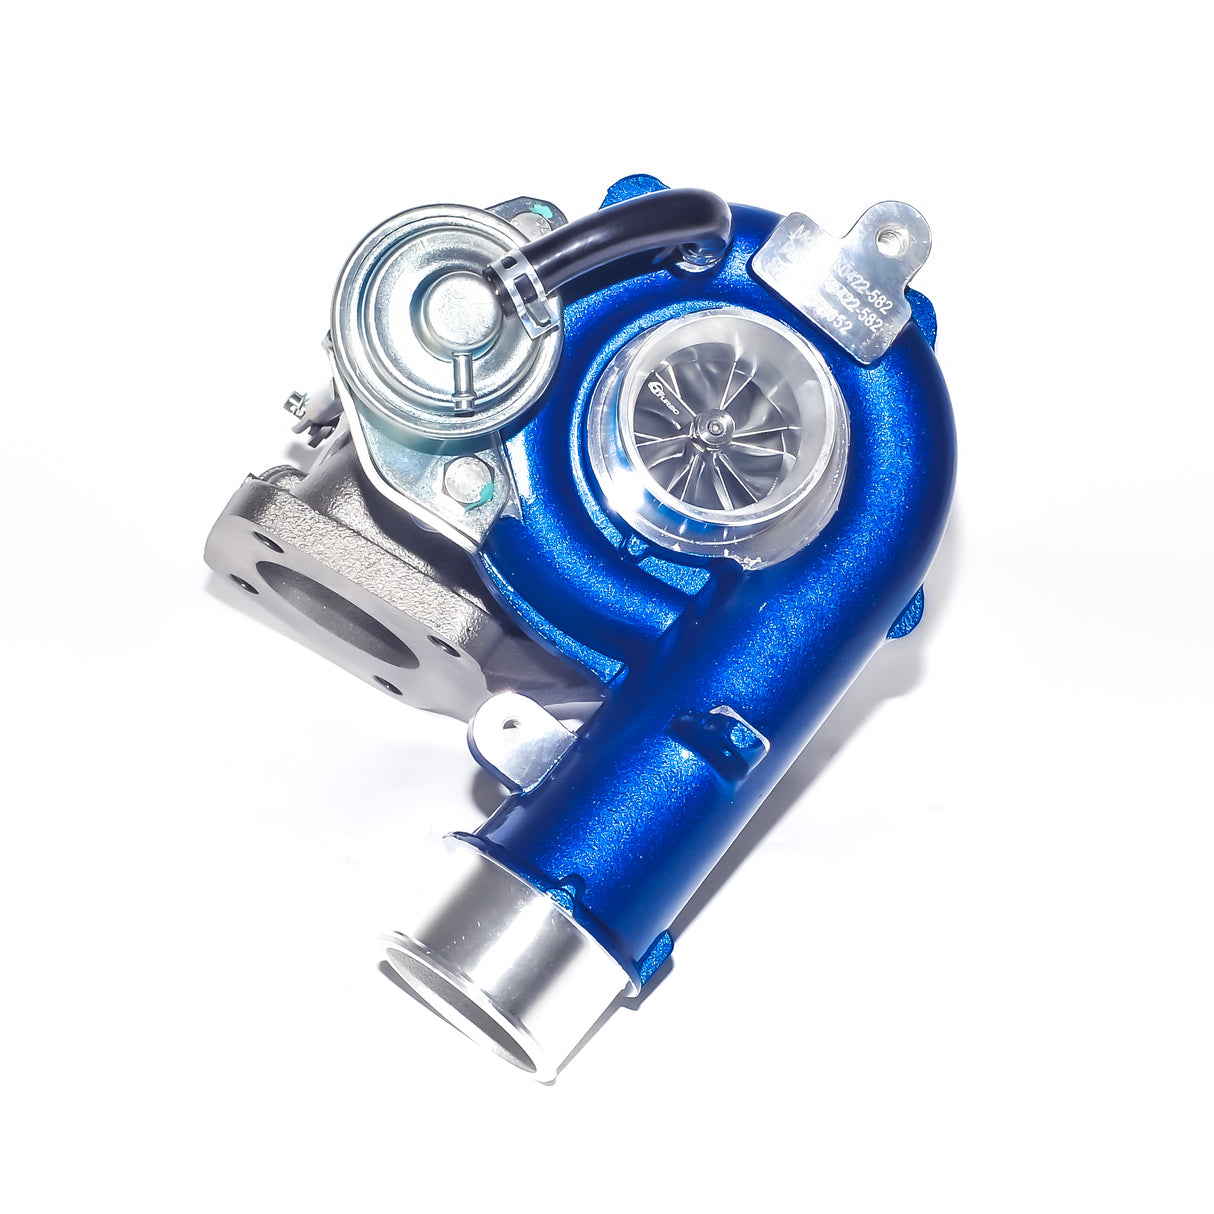 CCT Stage One Billet Turbo charger To Suit Mazda CX-7 2.3L Petrol